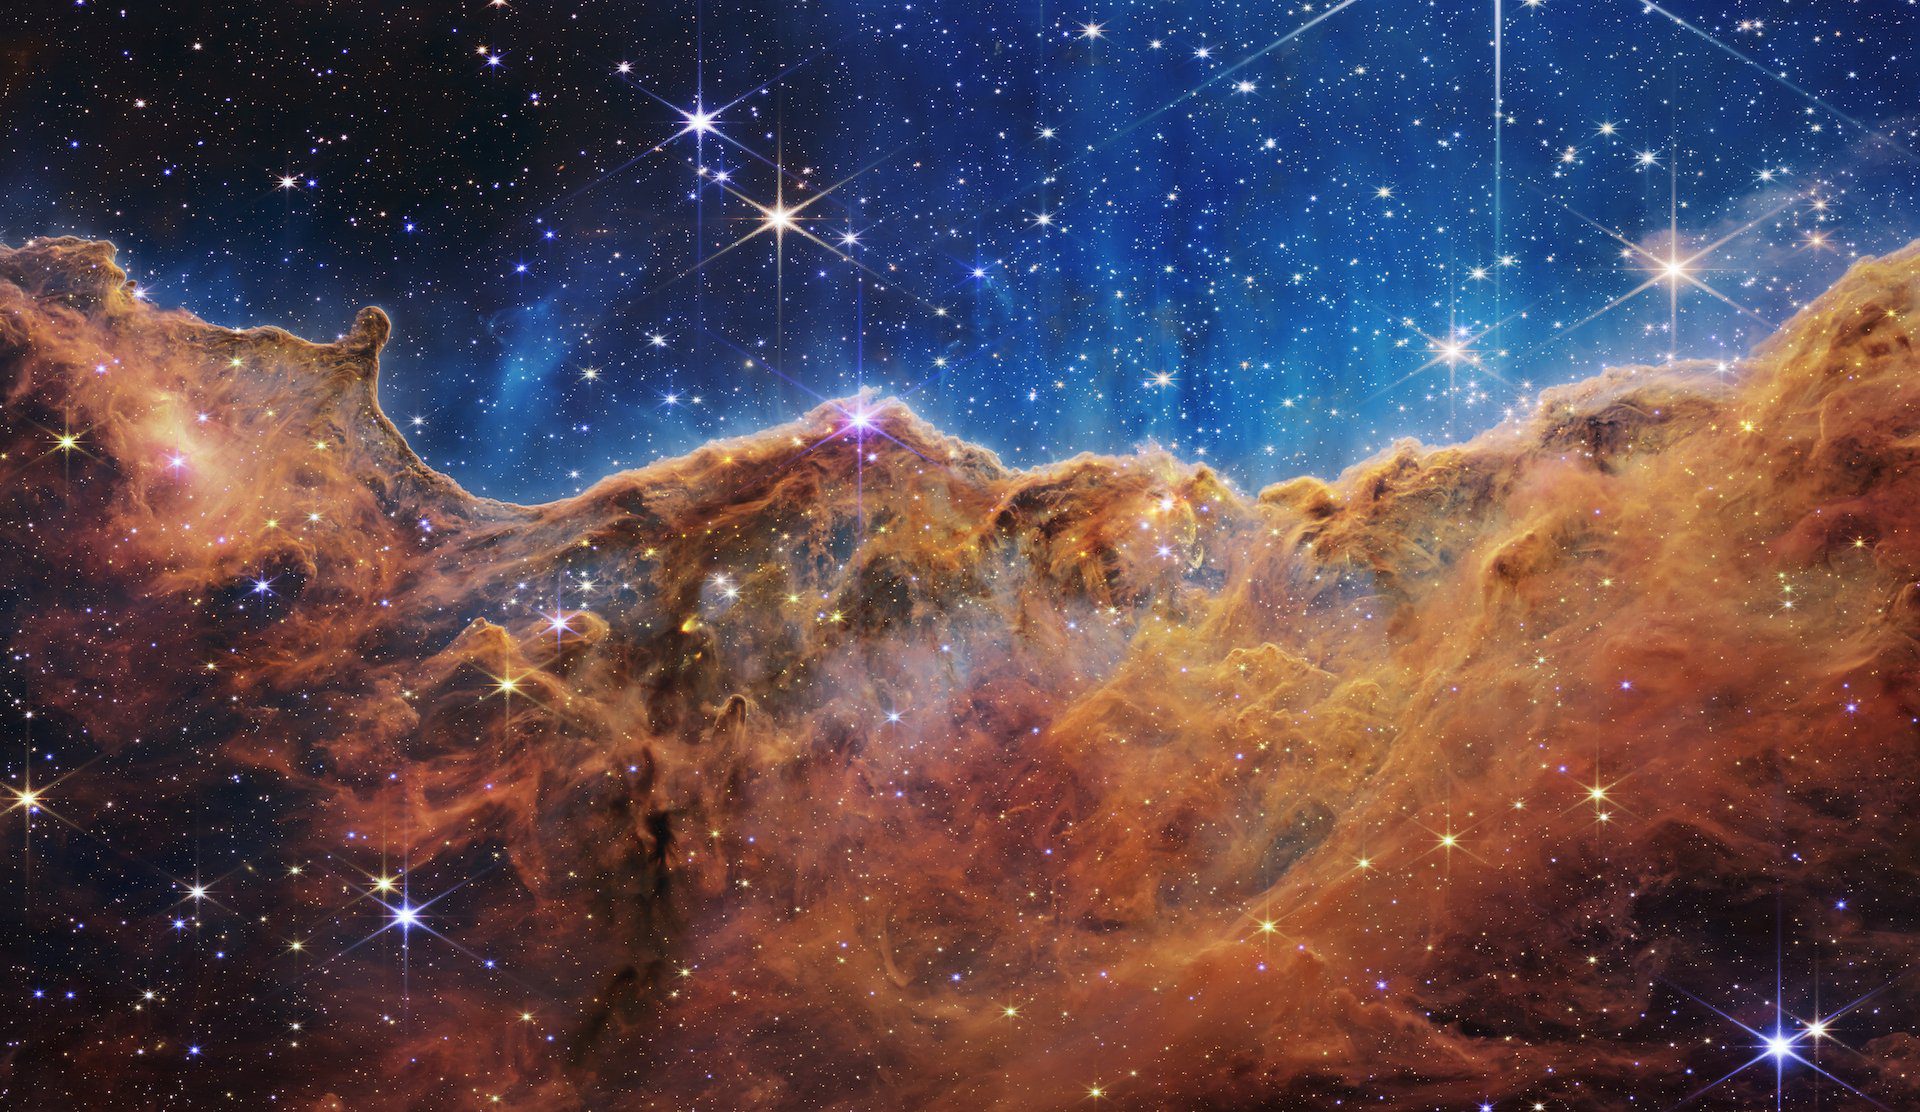 Clouds of dust and gas of the Carina Nebula, where stars are forming, imaged by the James Webb Telescope.